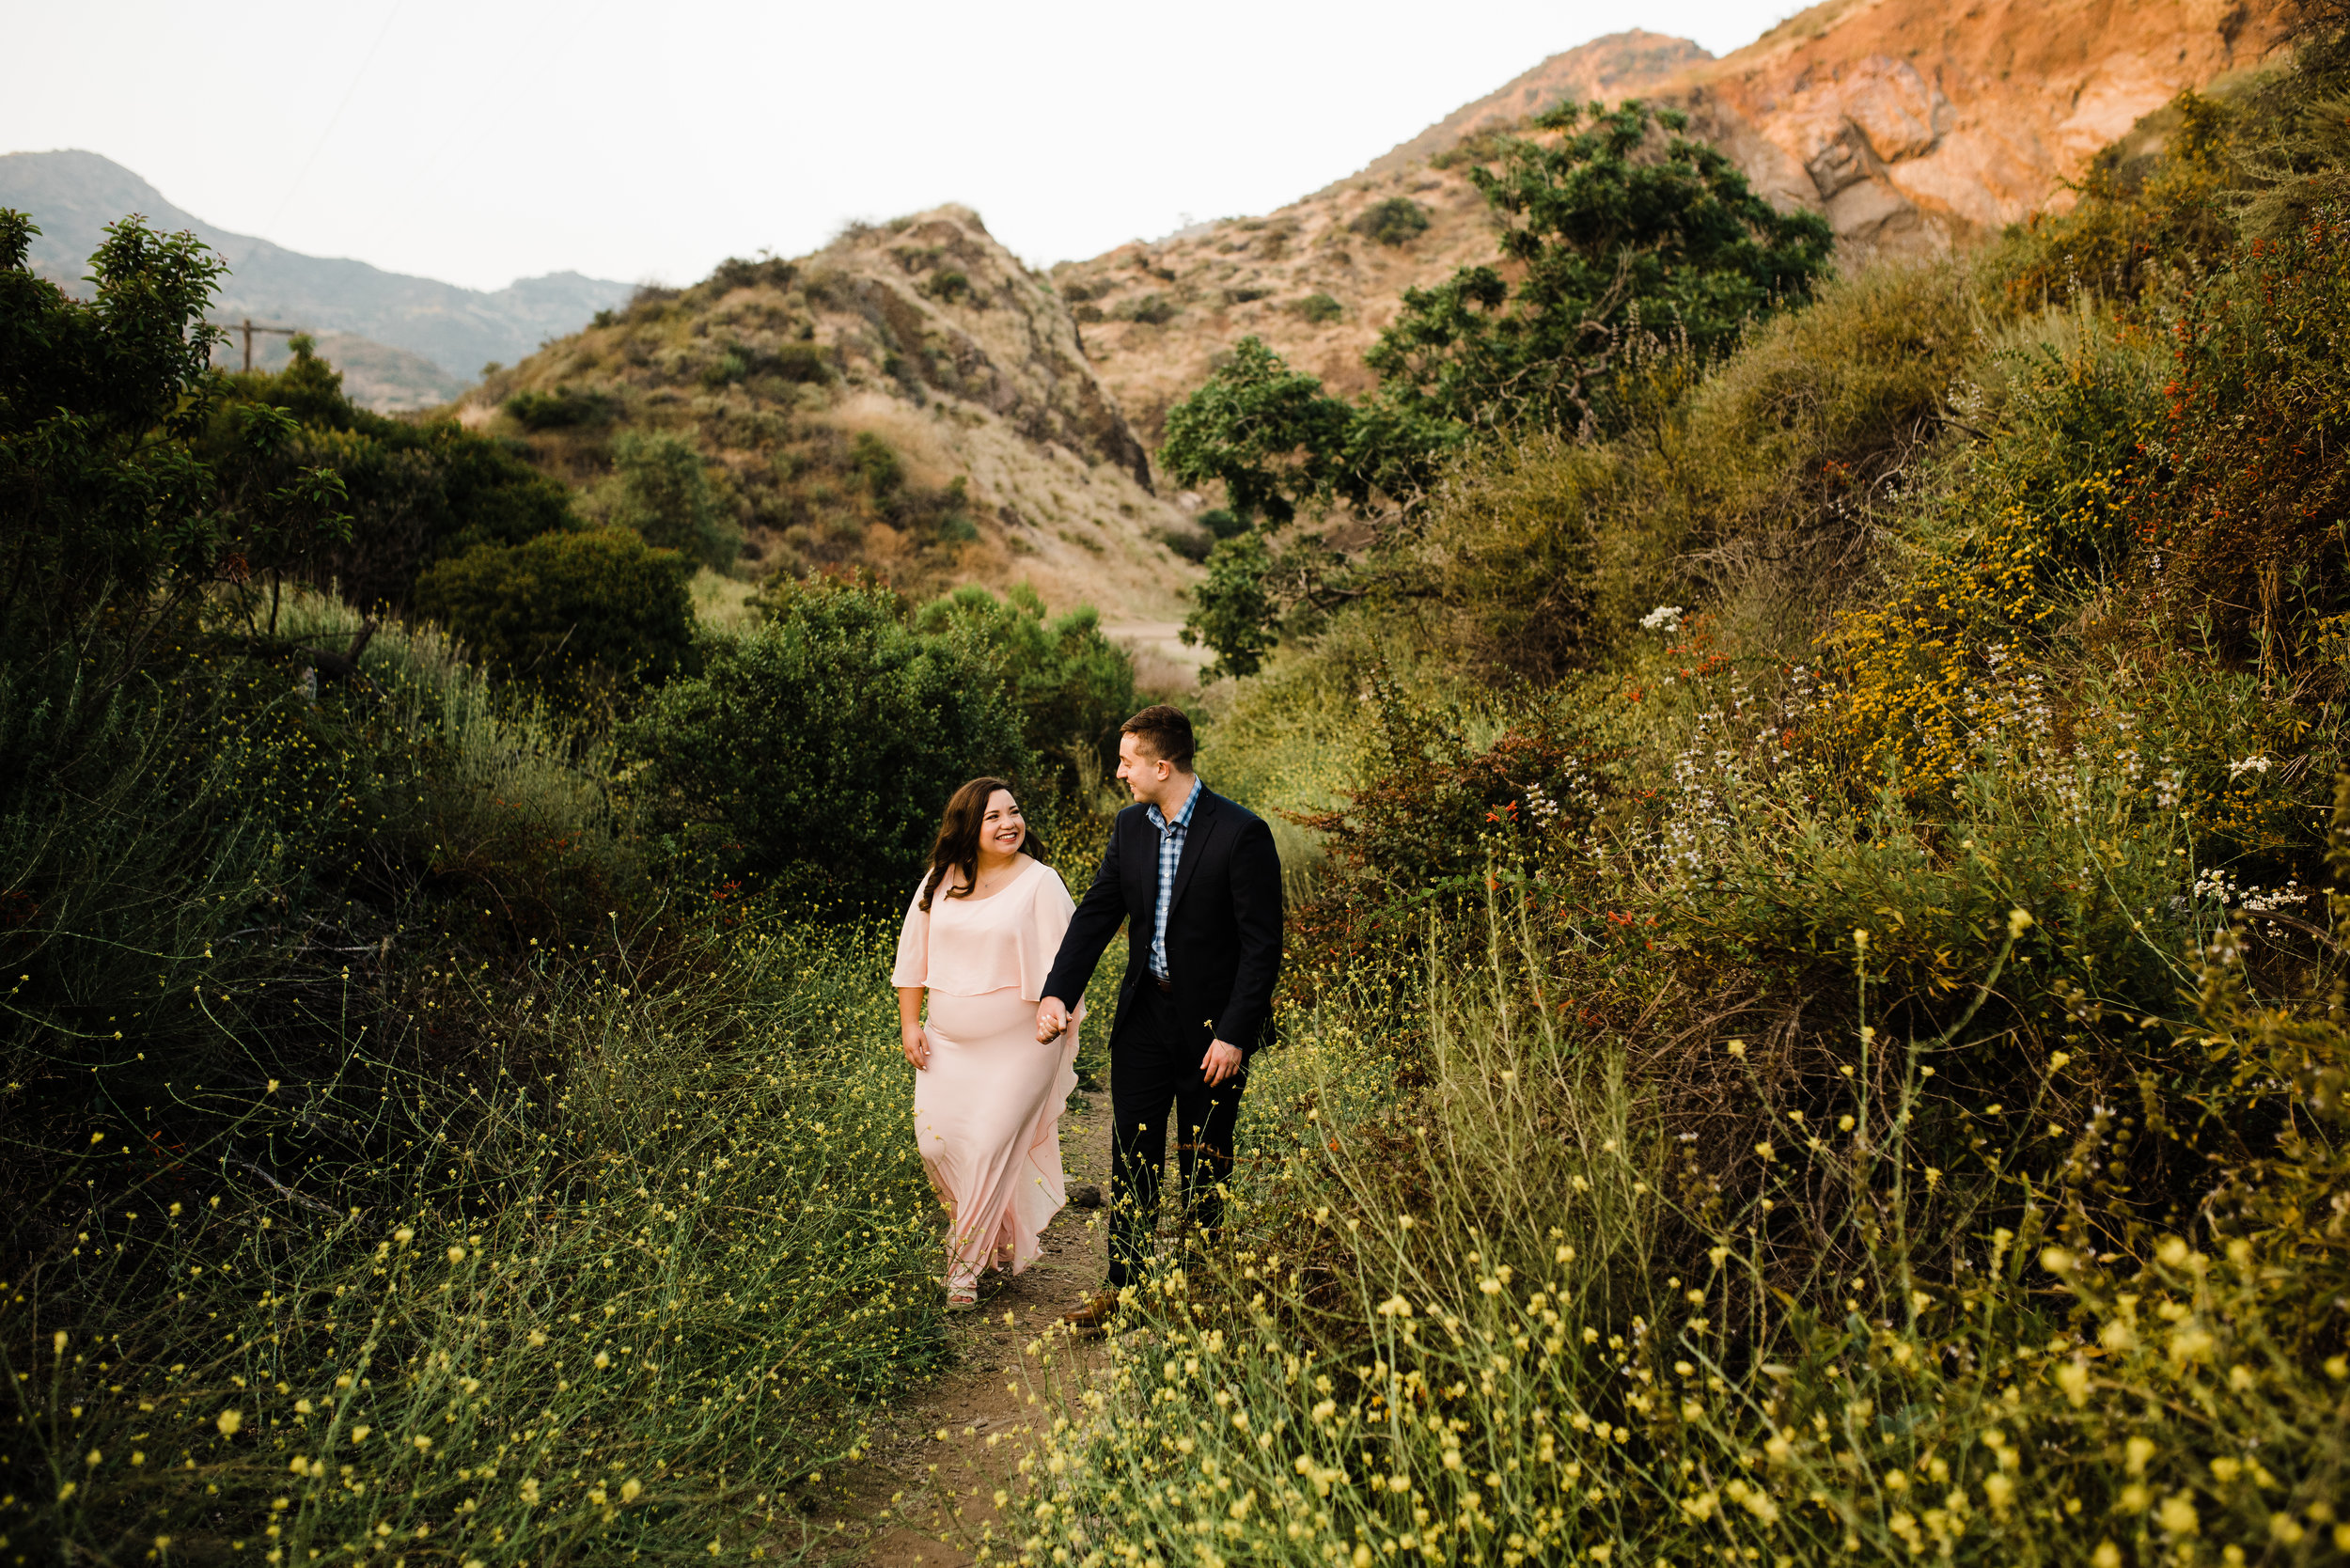 Formal wear at an adventurous engagement shoot in Los Angeles, California